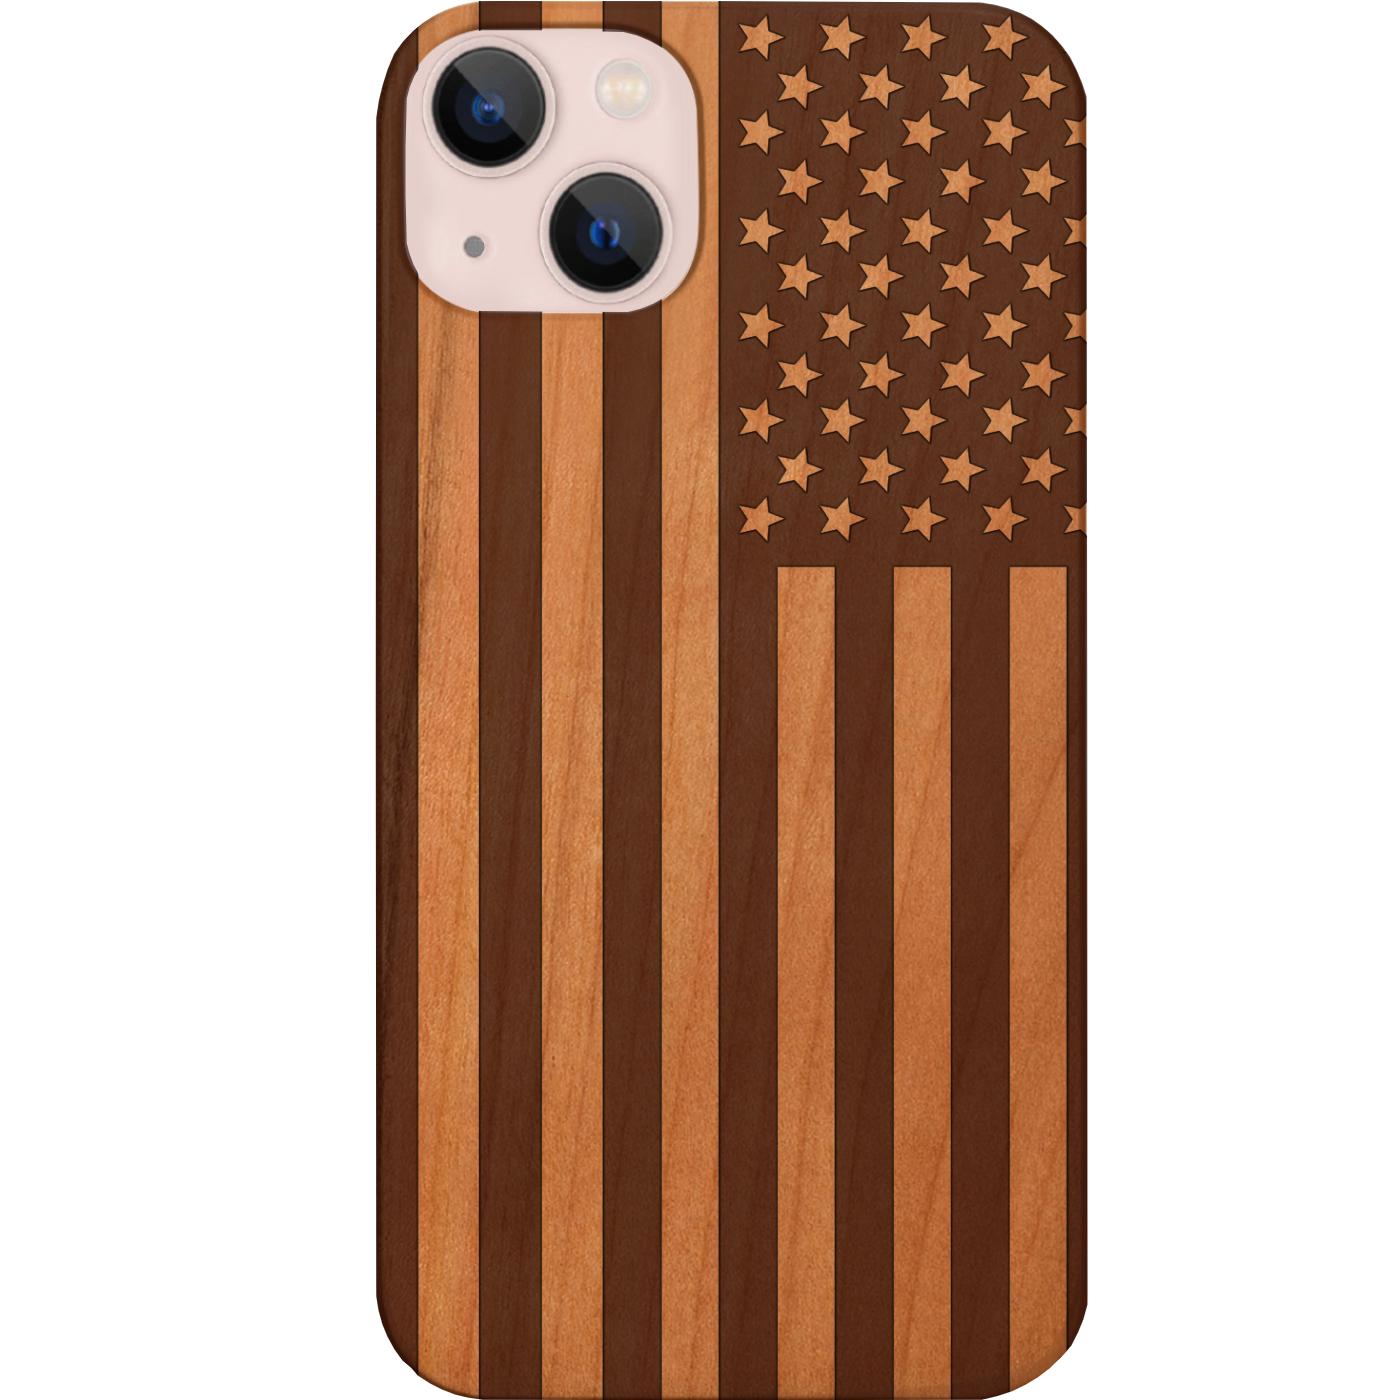 20 Awesome iPhone 6 and iPhone 6+ Cases for Your New Phone